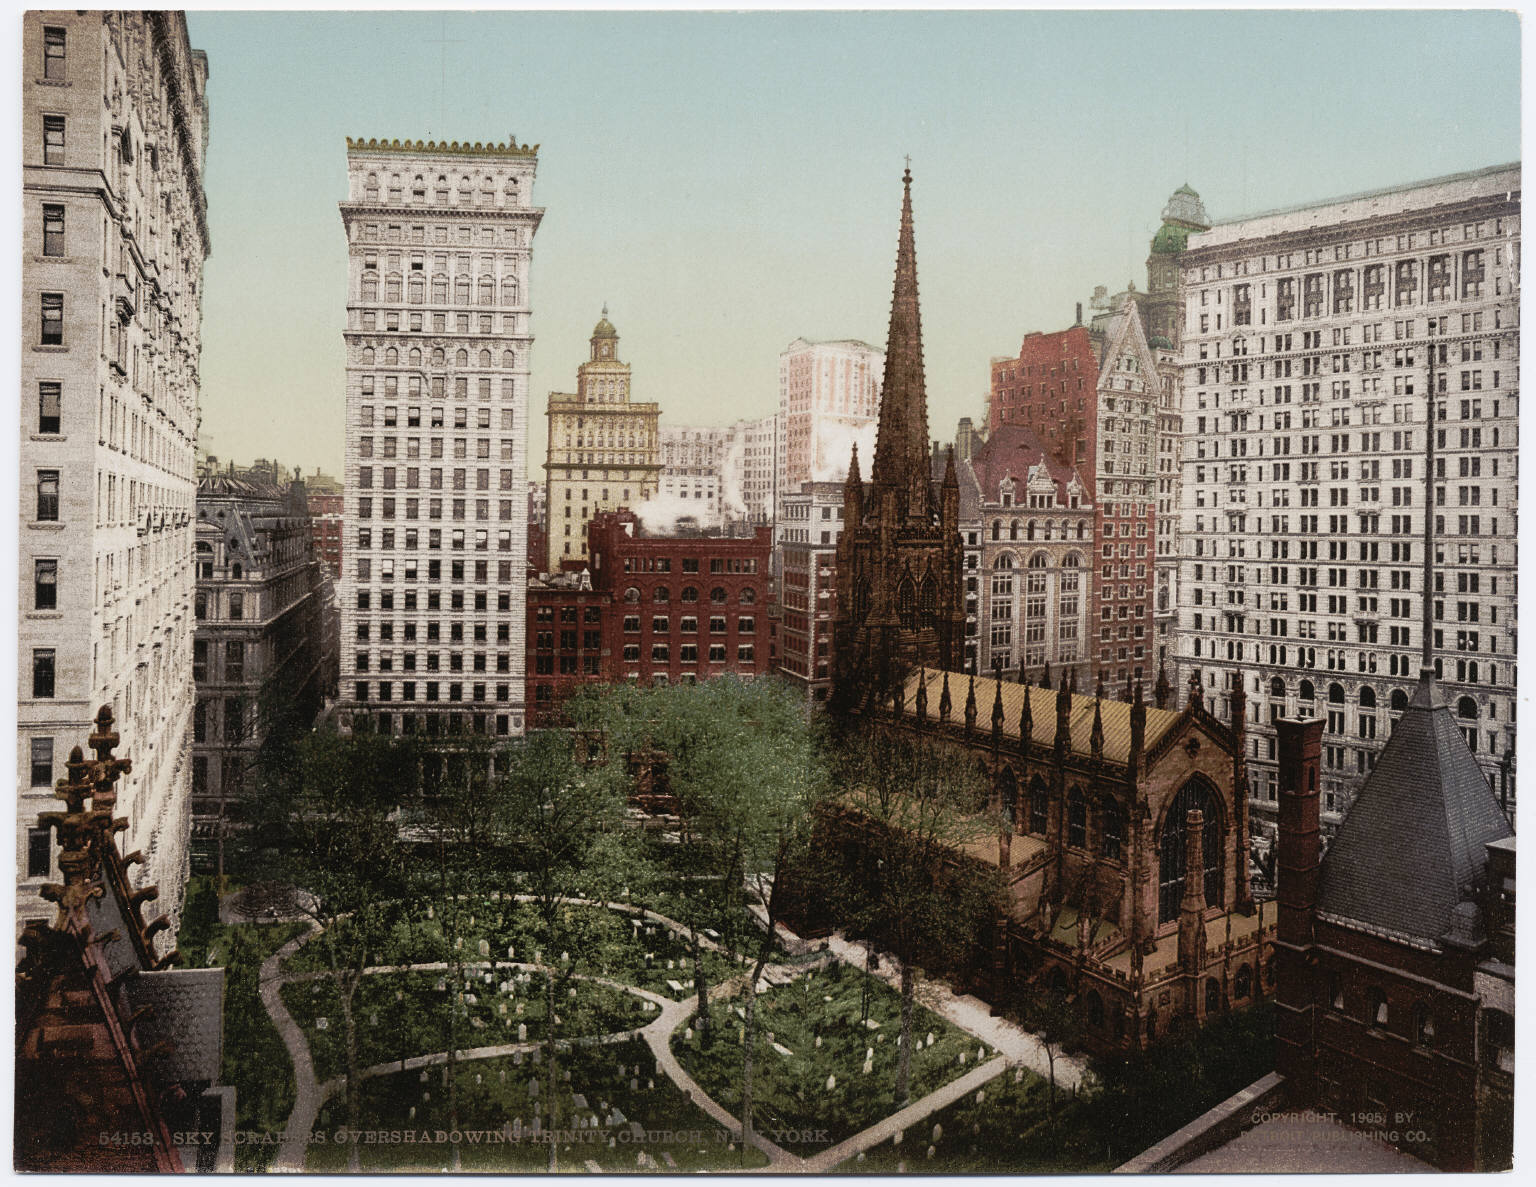 Trinity Church and grounds, image circa 1900's by the Detroit Photographic Company